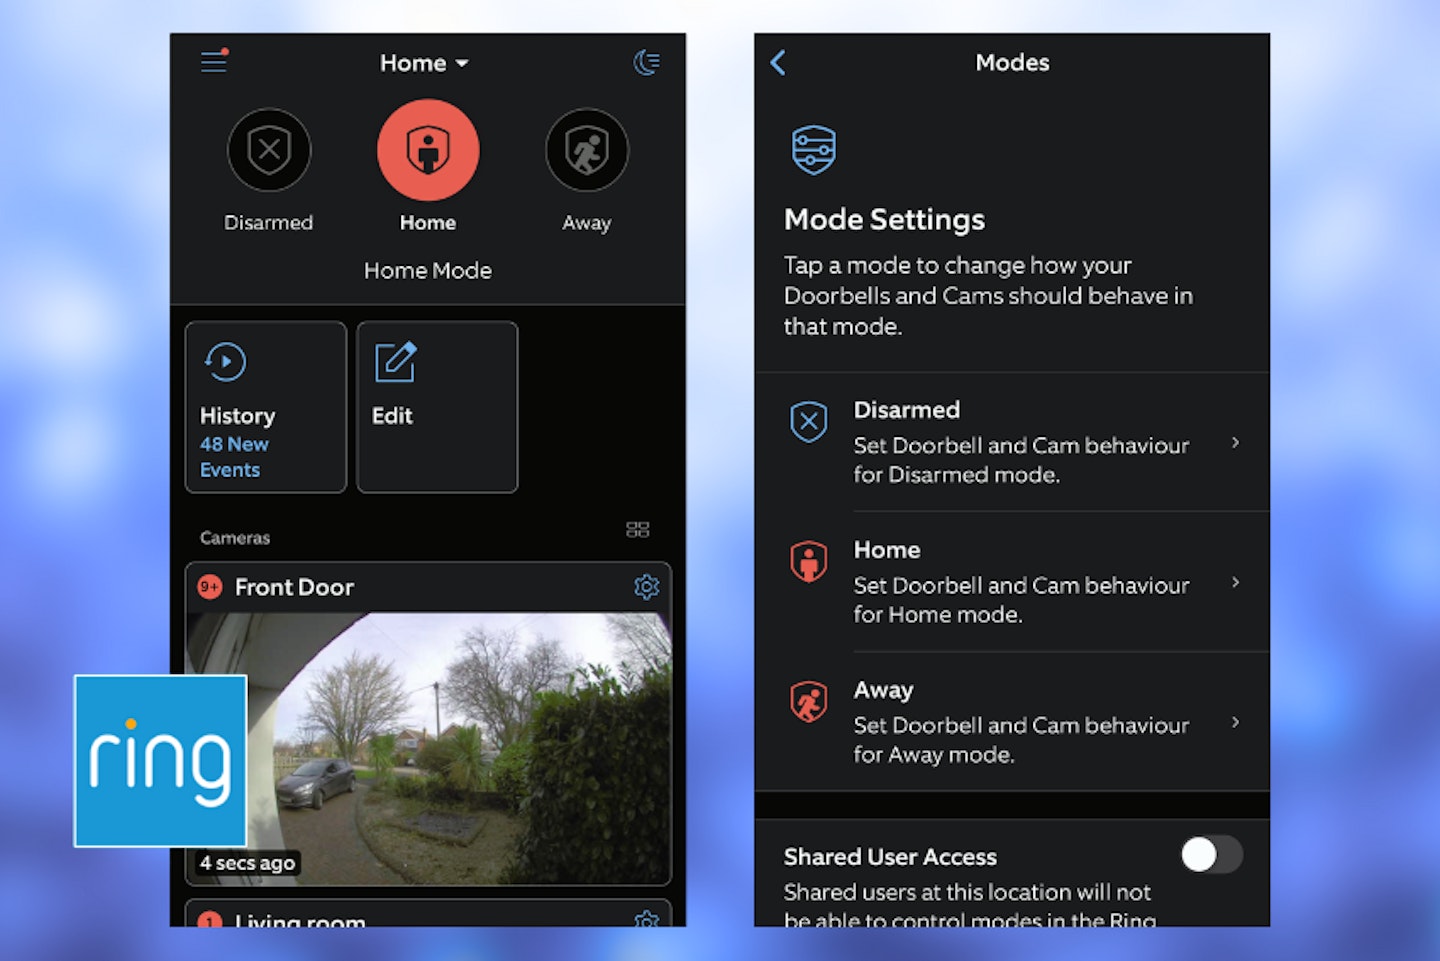 MODE SCREENS FROM THE RING APP